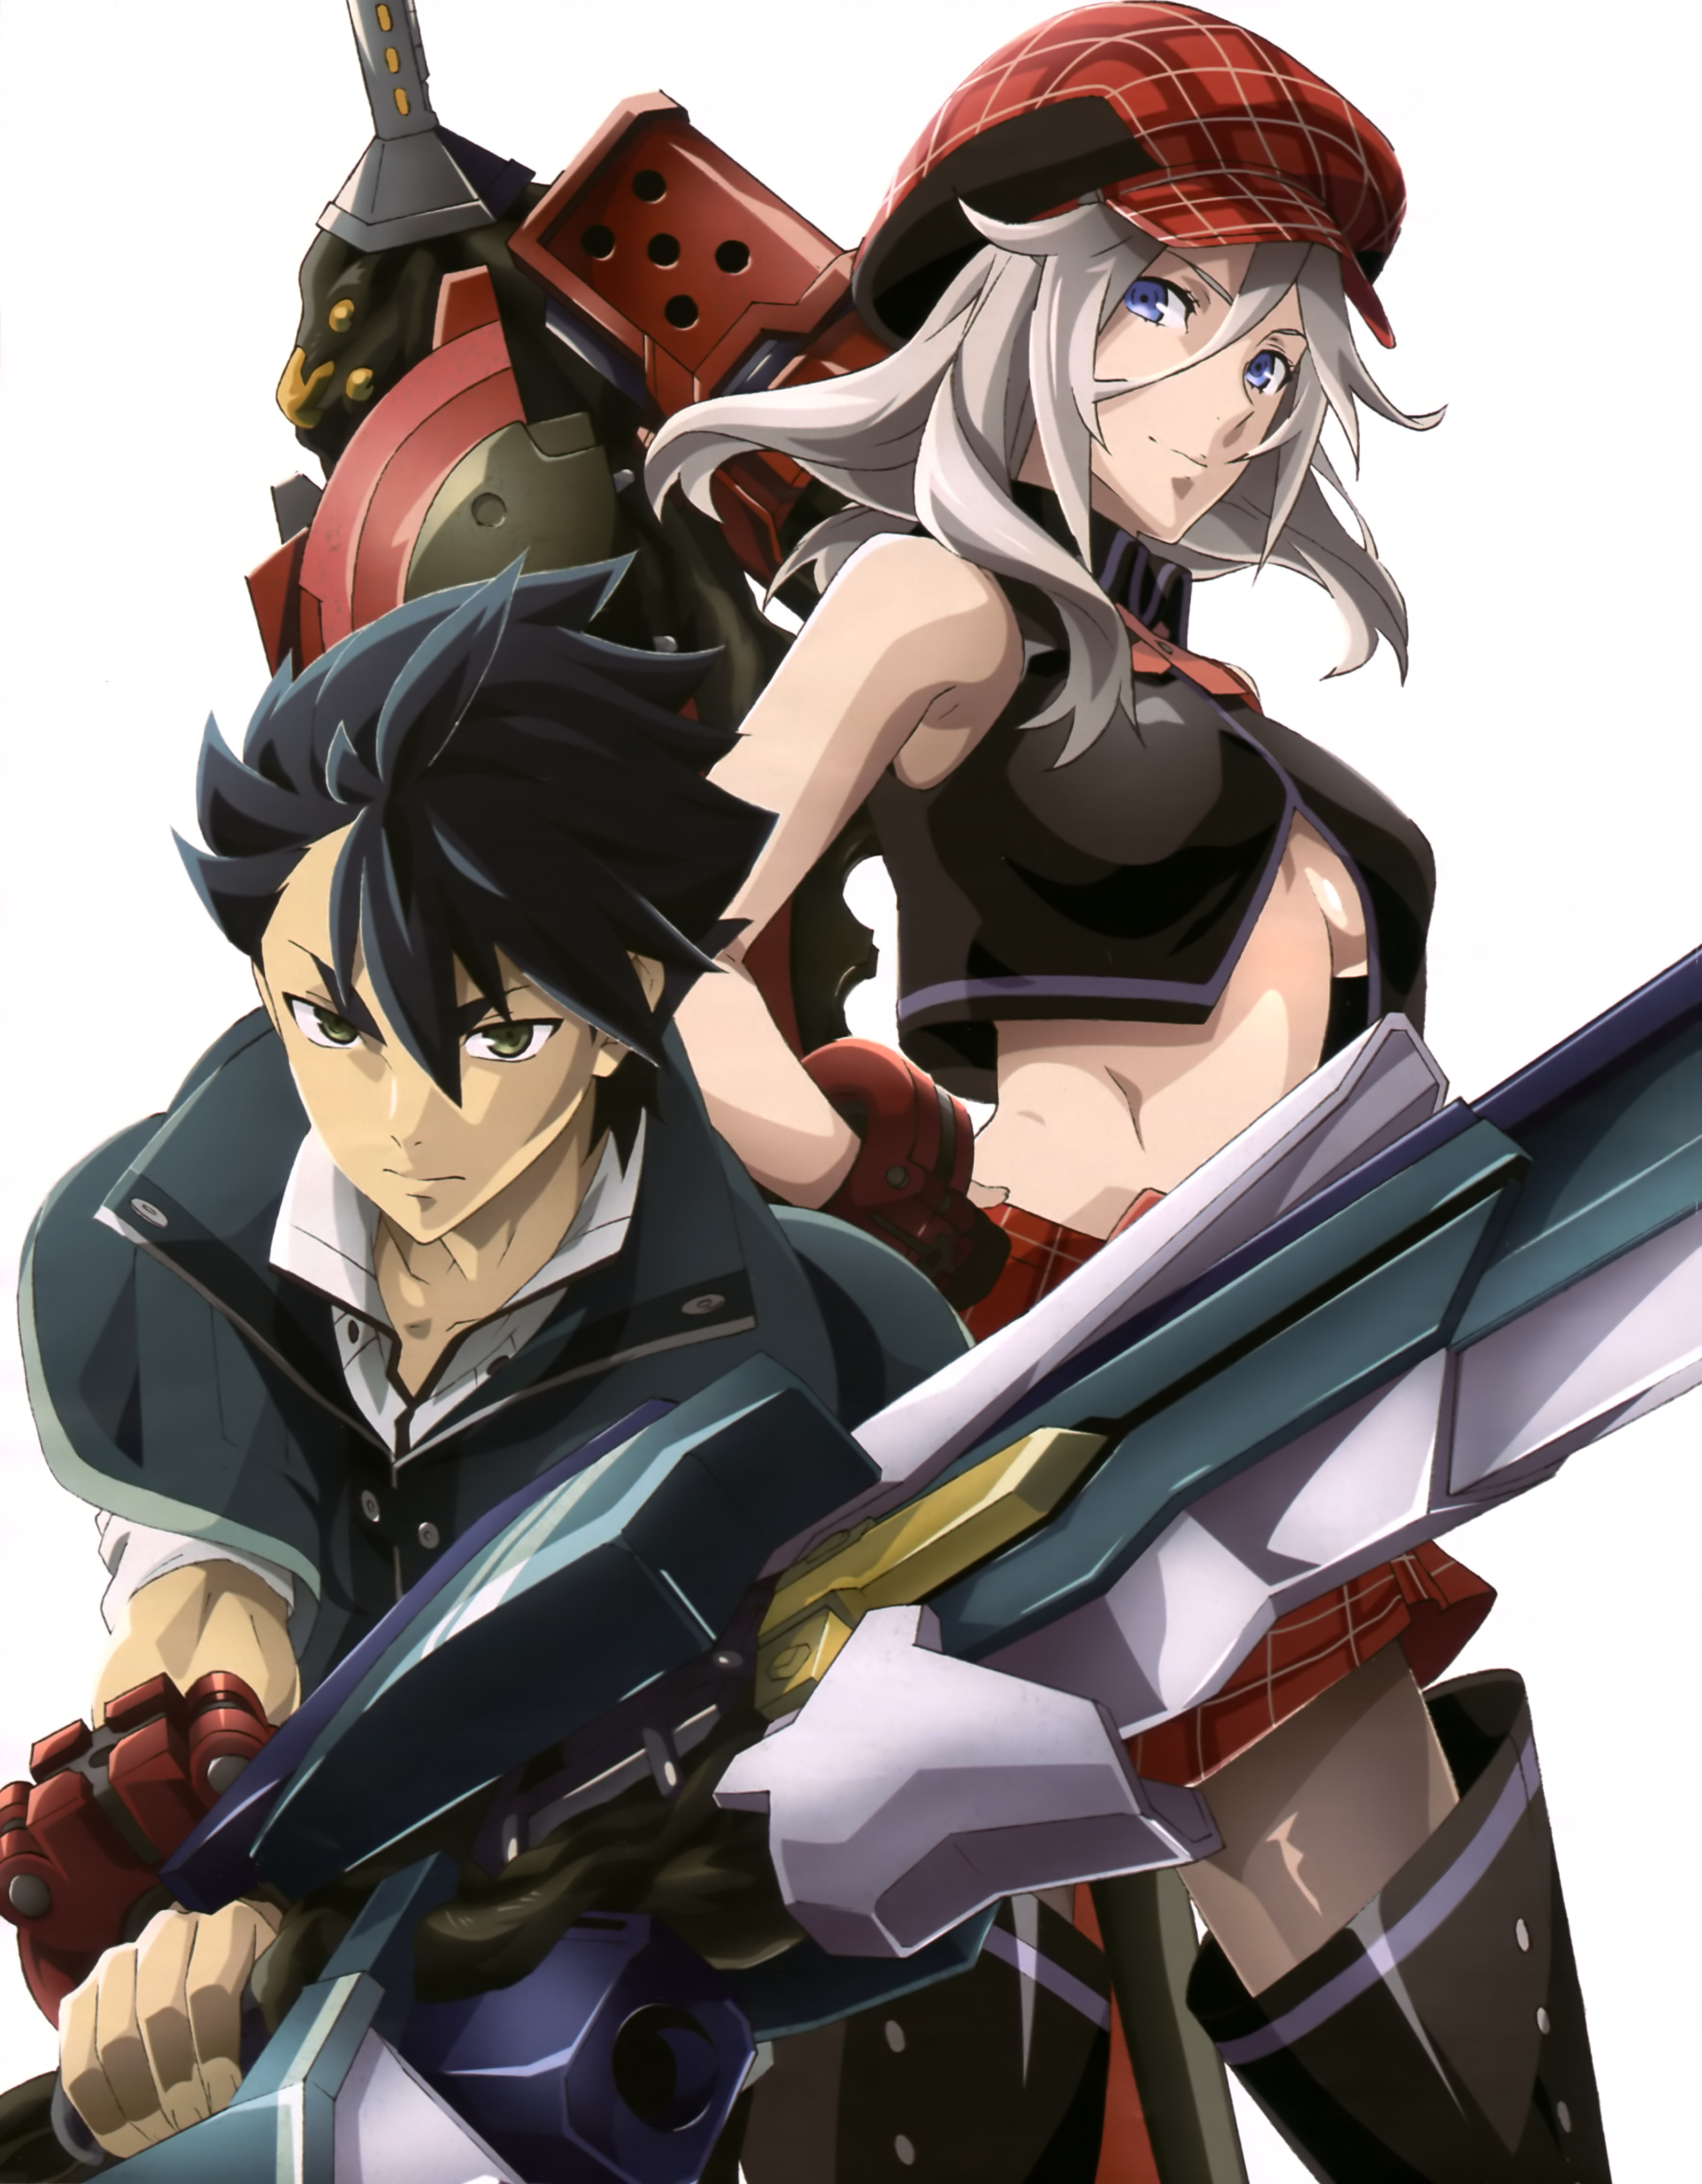 New God Eater Anime Visual Featured in Animedia